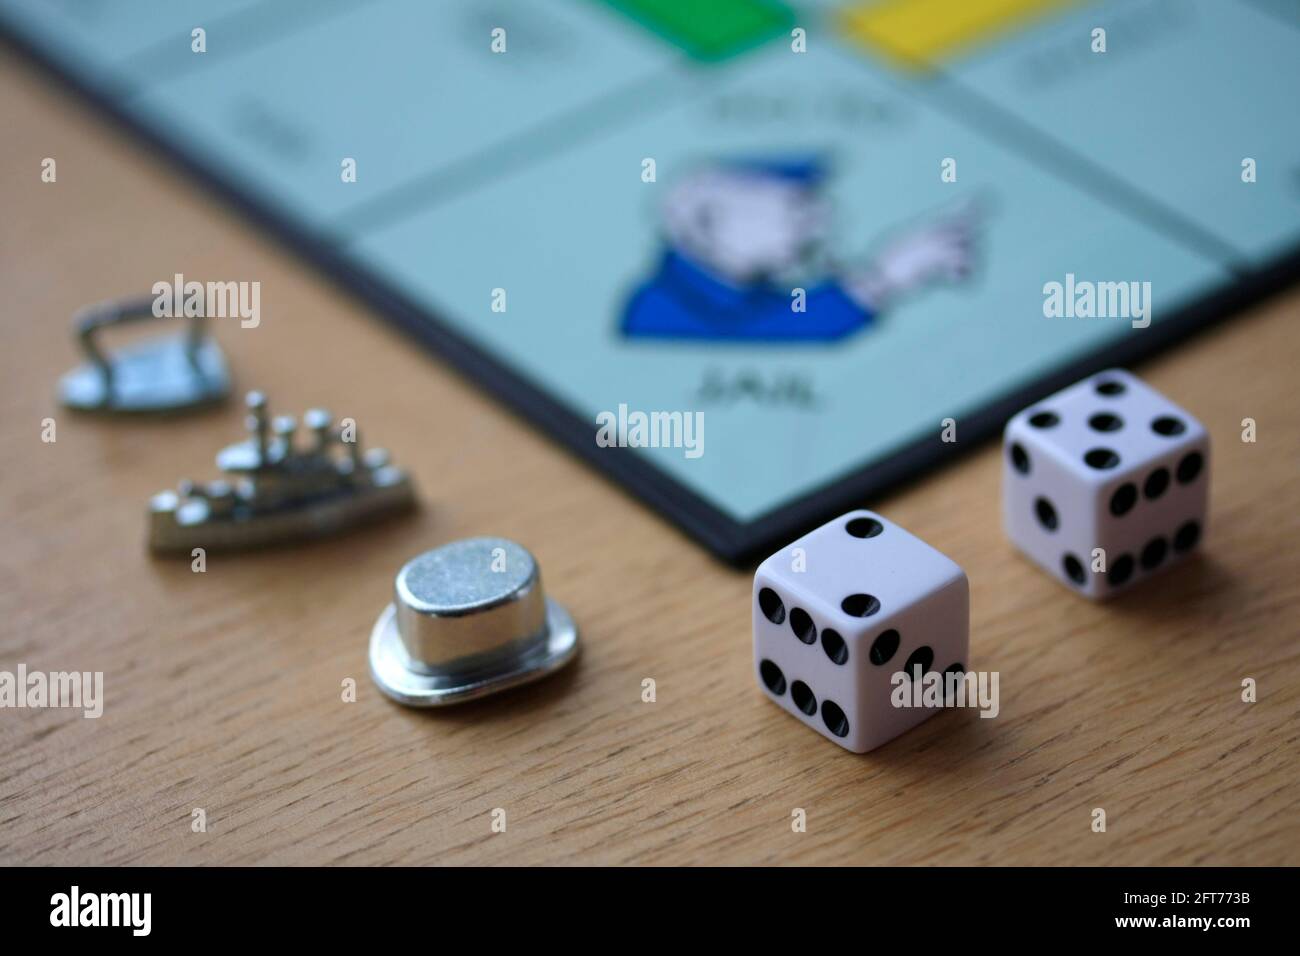 Monopoly board game pieces and dice Stock Photo